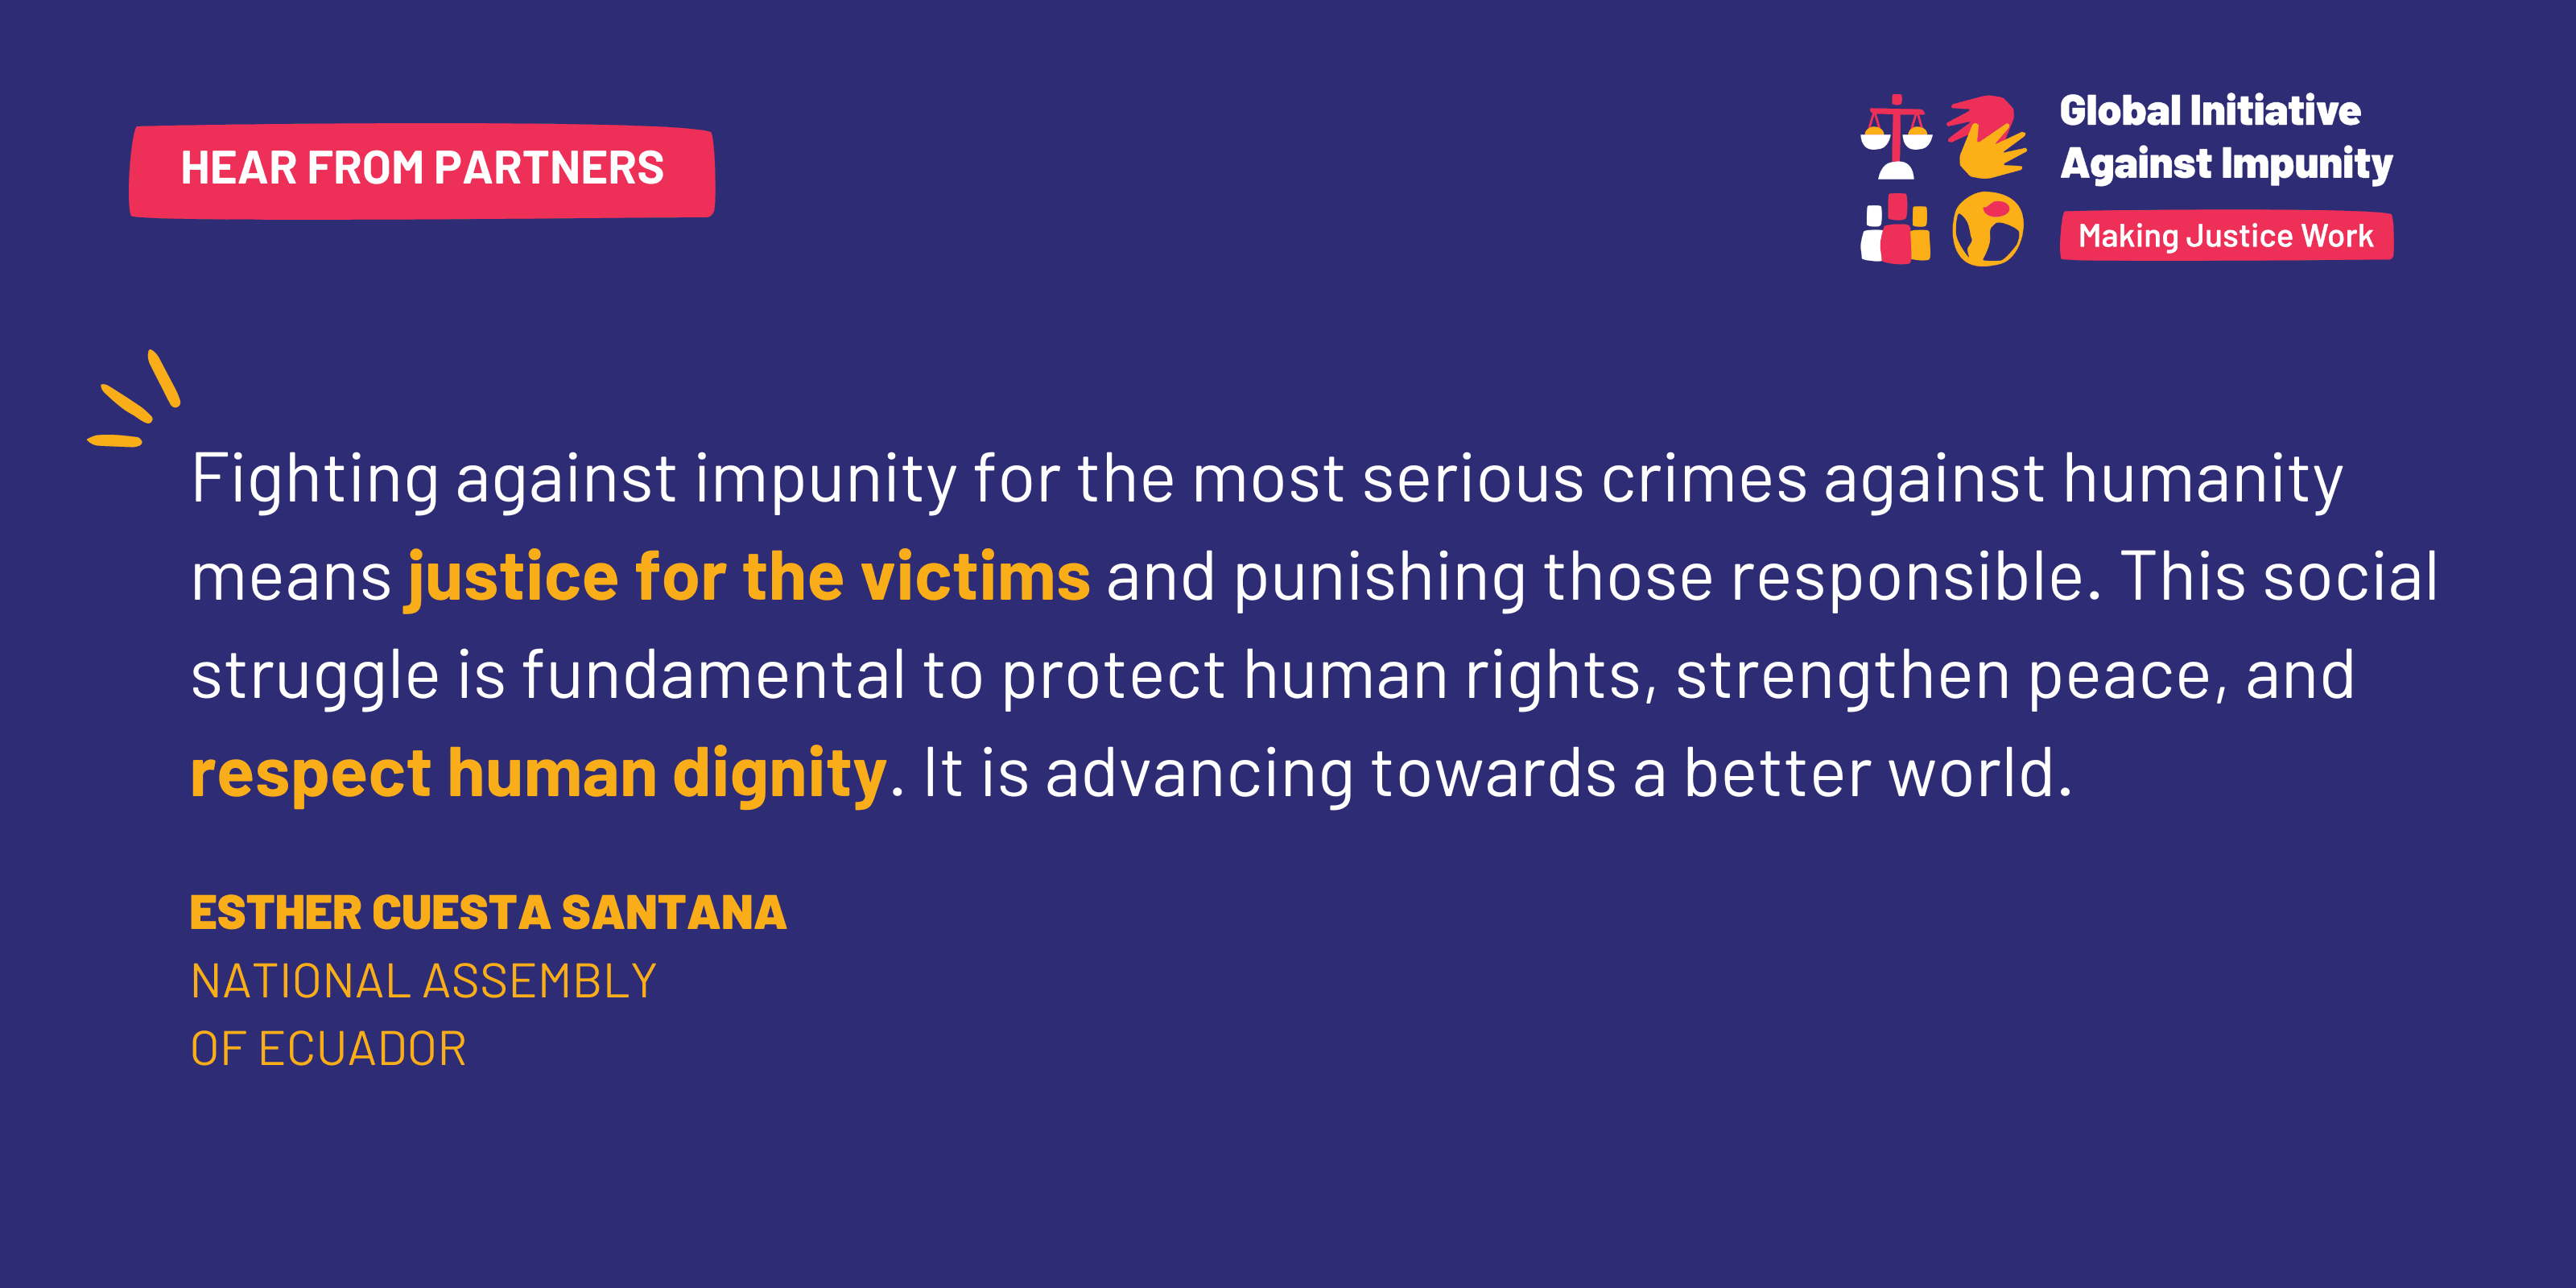 Fighting against impunity for the most serious crimes against humanity means justice for the victims and punishing those responsible. This social struggle is fundamental to protect human rights, strengthen peace, and respect human dignity. It is advancing towards a better world.